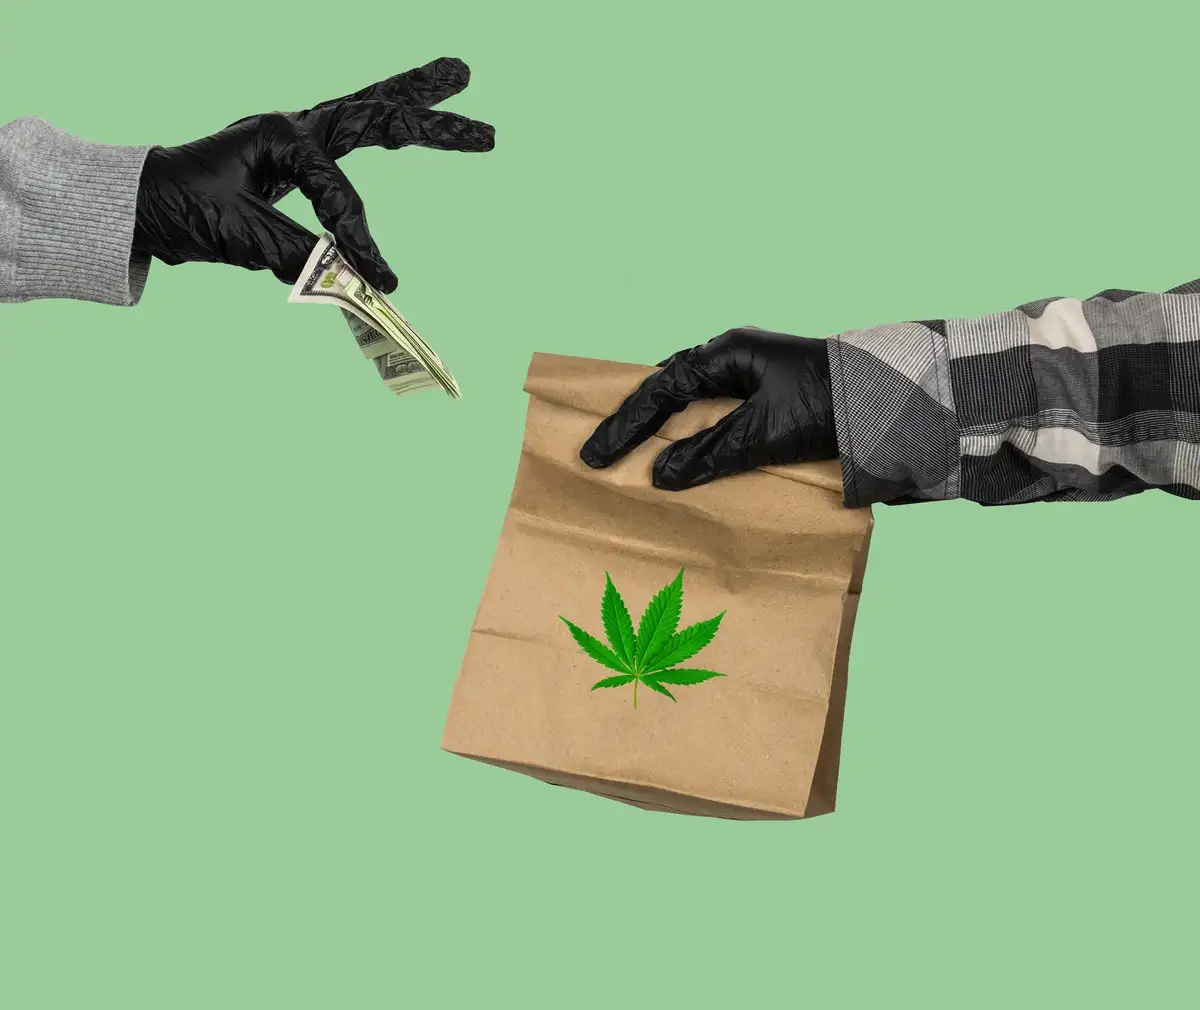 Man handling cannabis product and other man paying for it